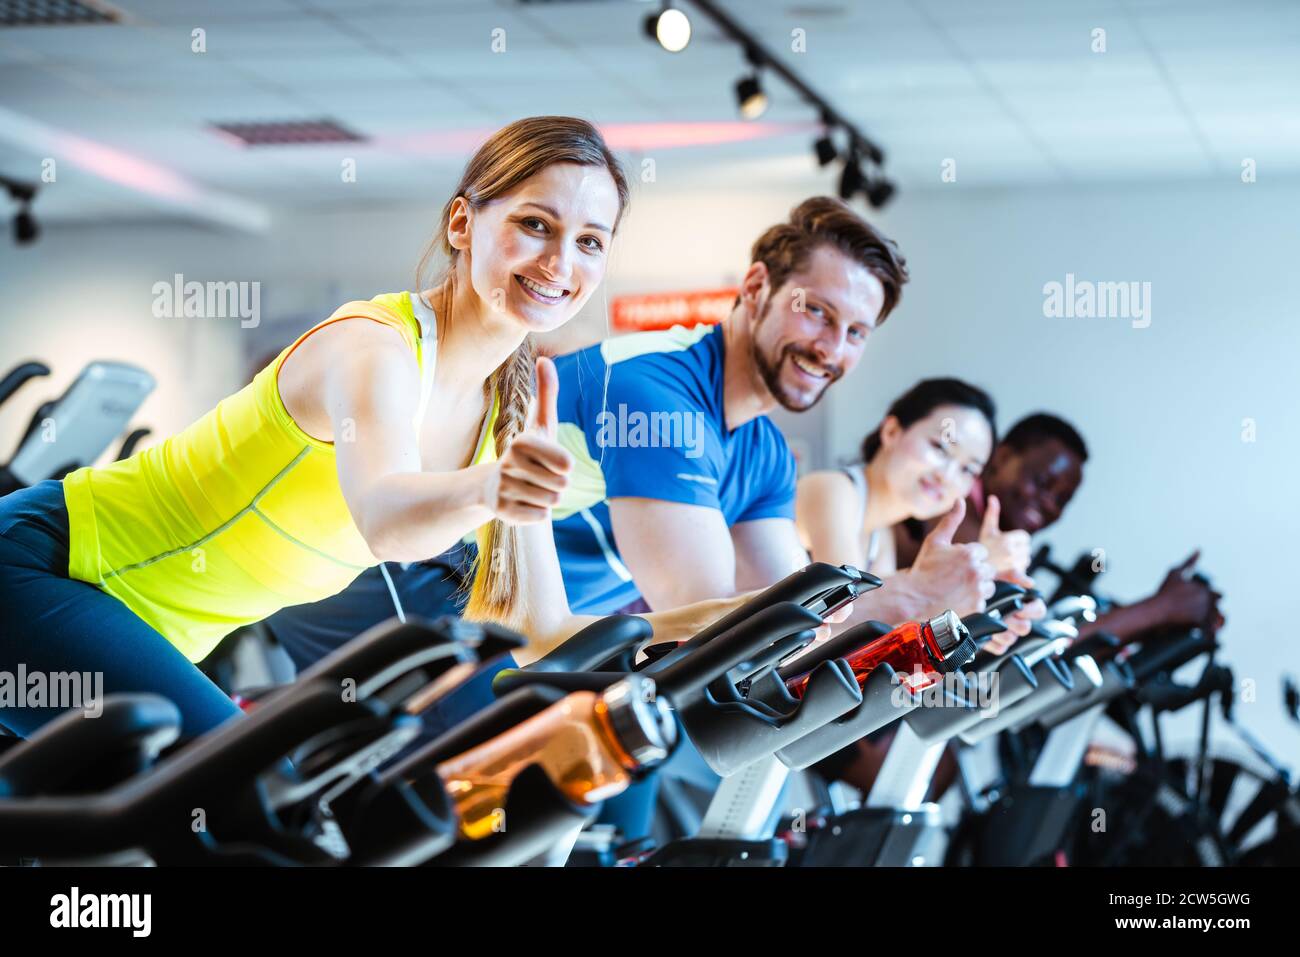 Woman showing thumbs up sign exercising of fitness bike in gym Stock Photo